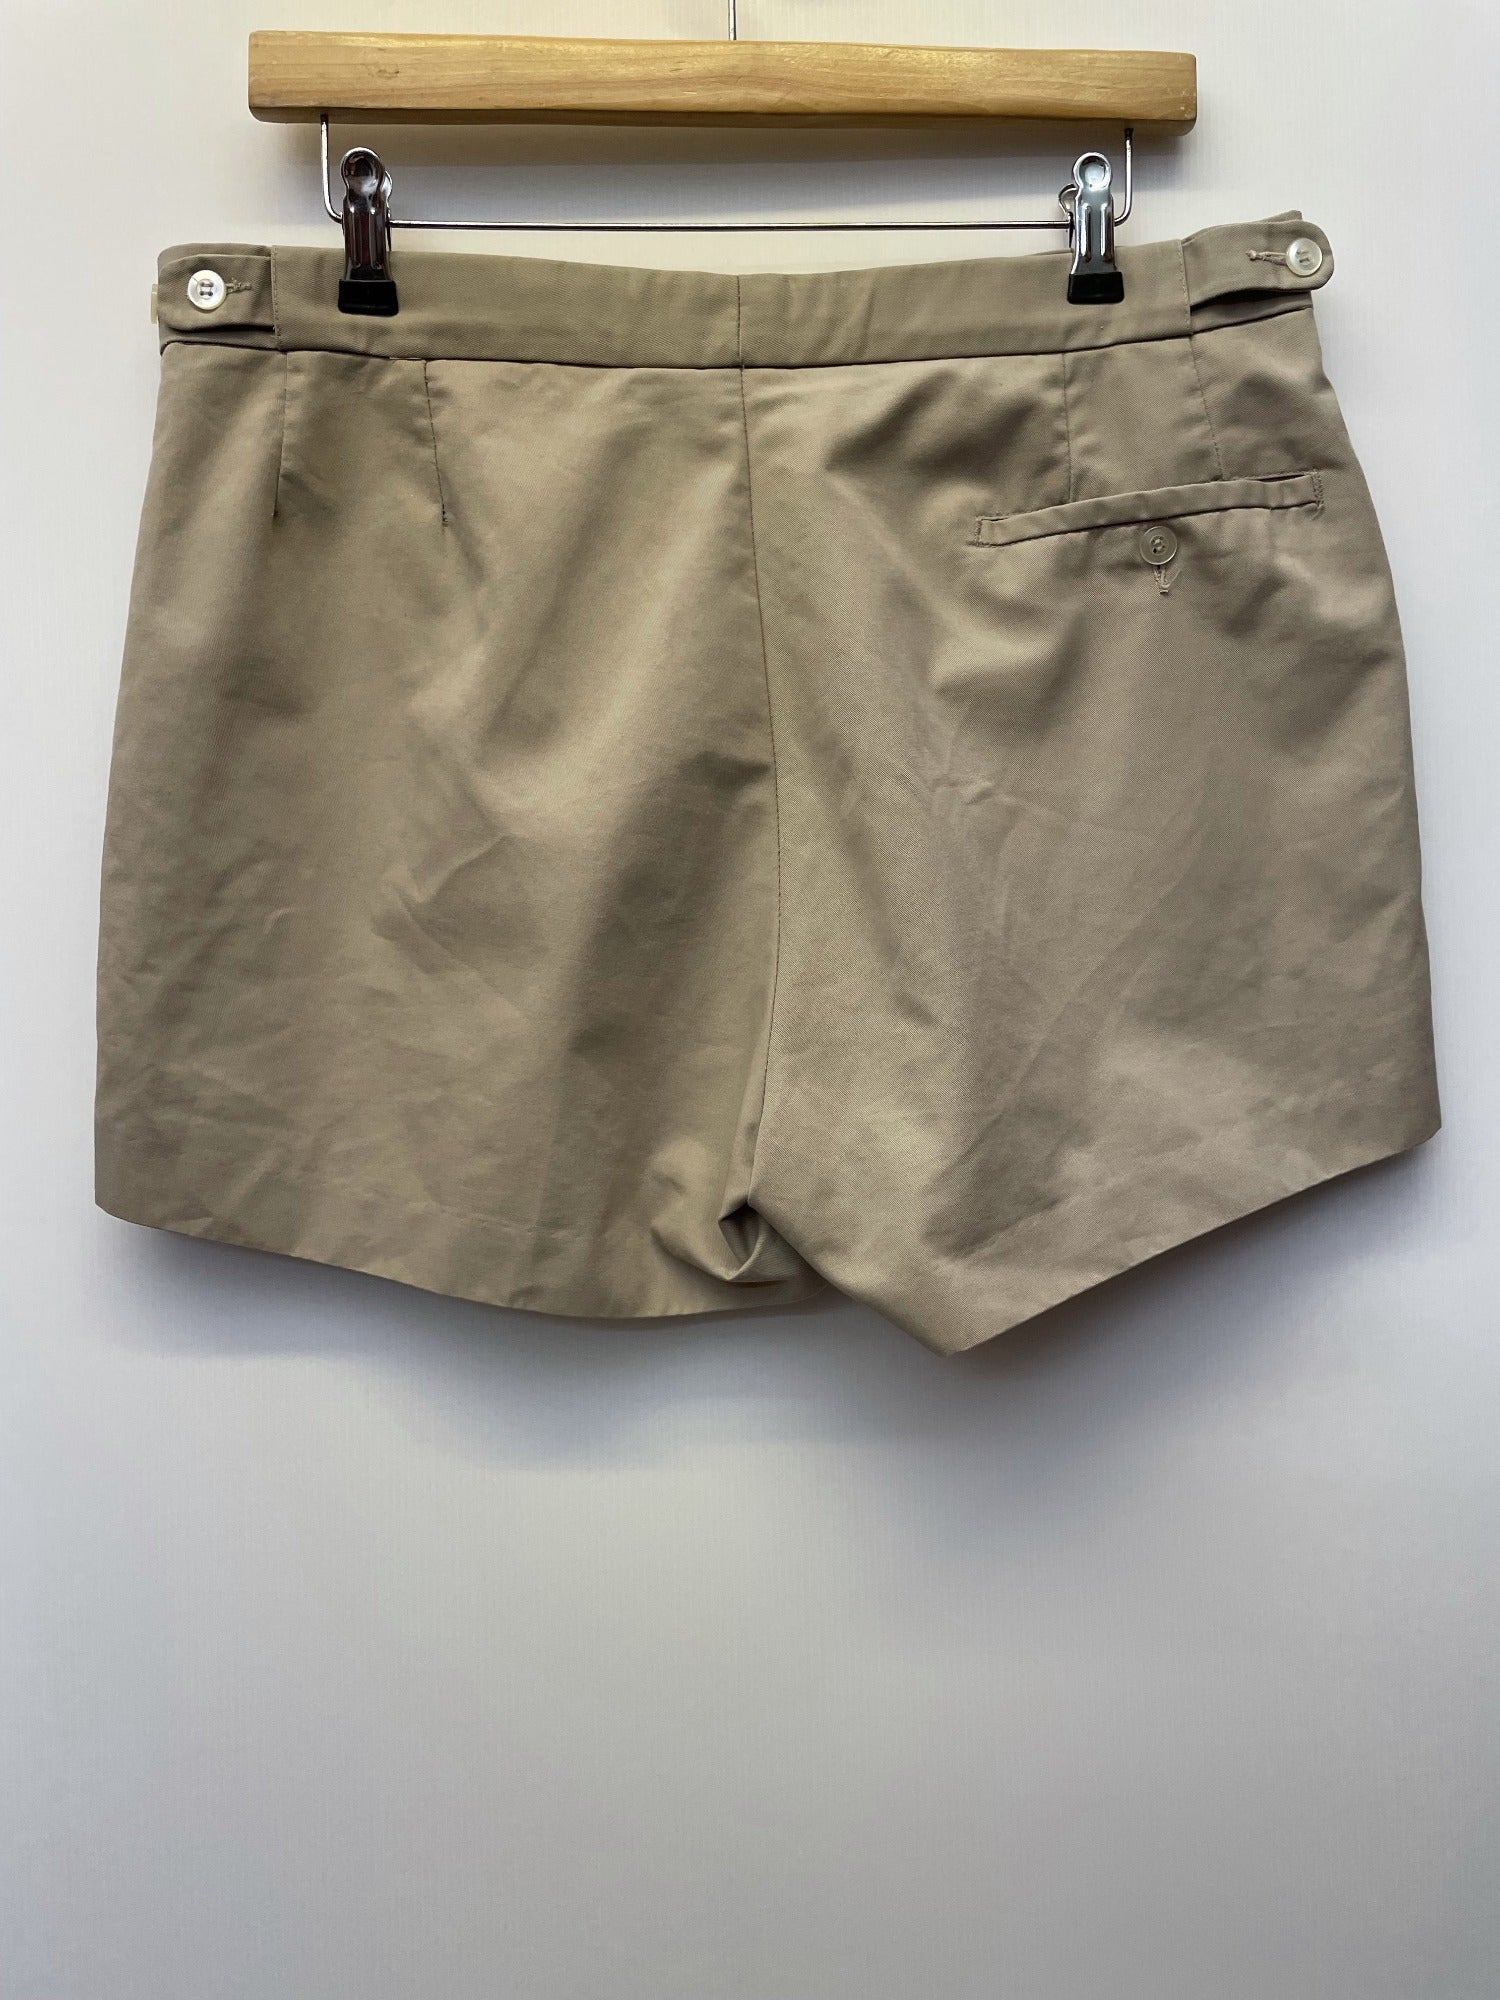 Mens original 1980s Fred Perry Sportswear shorts in tan. Zip fastening and waist button fastening adjustment with classic embroidered Fred Perry logo.